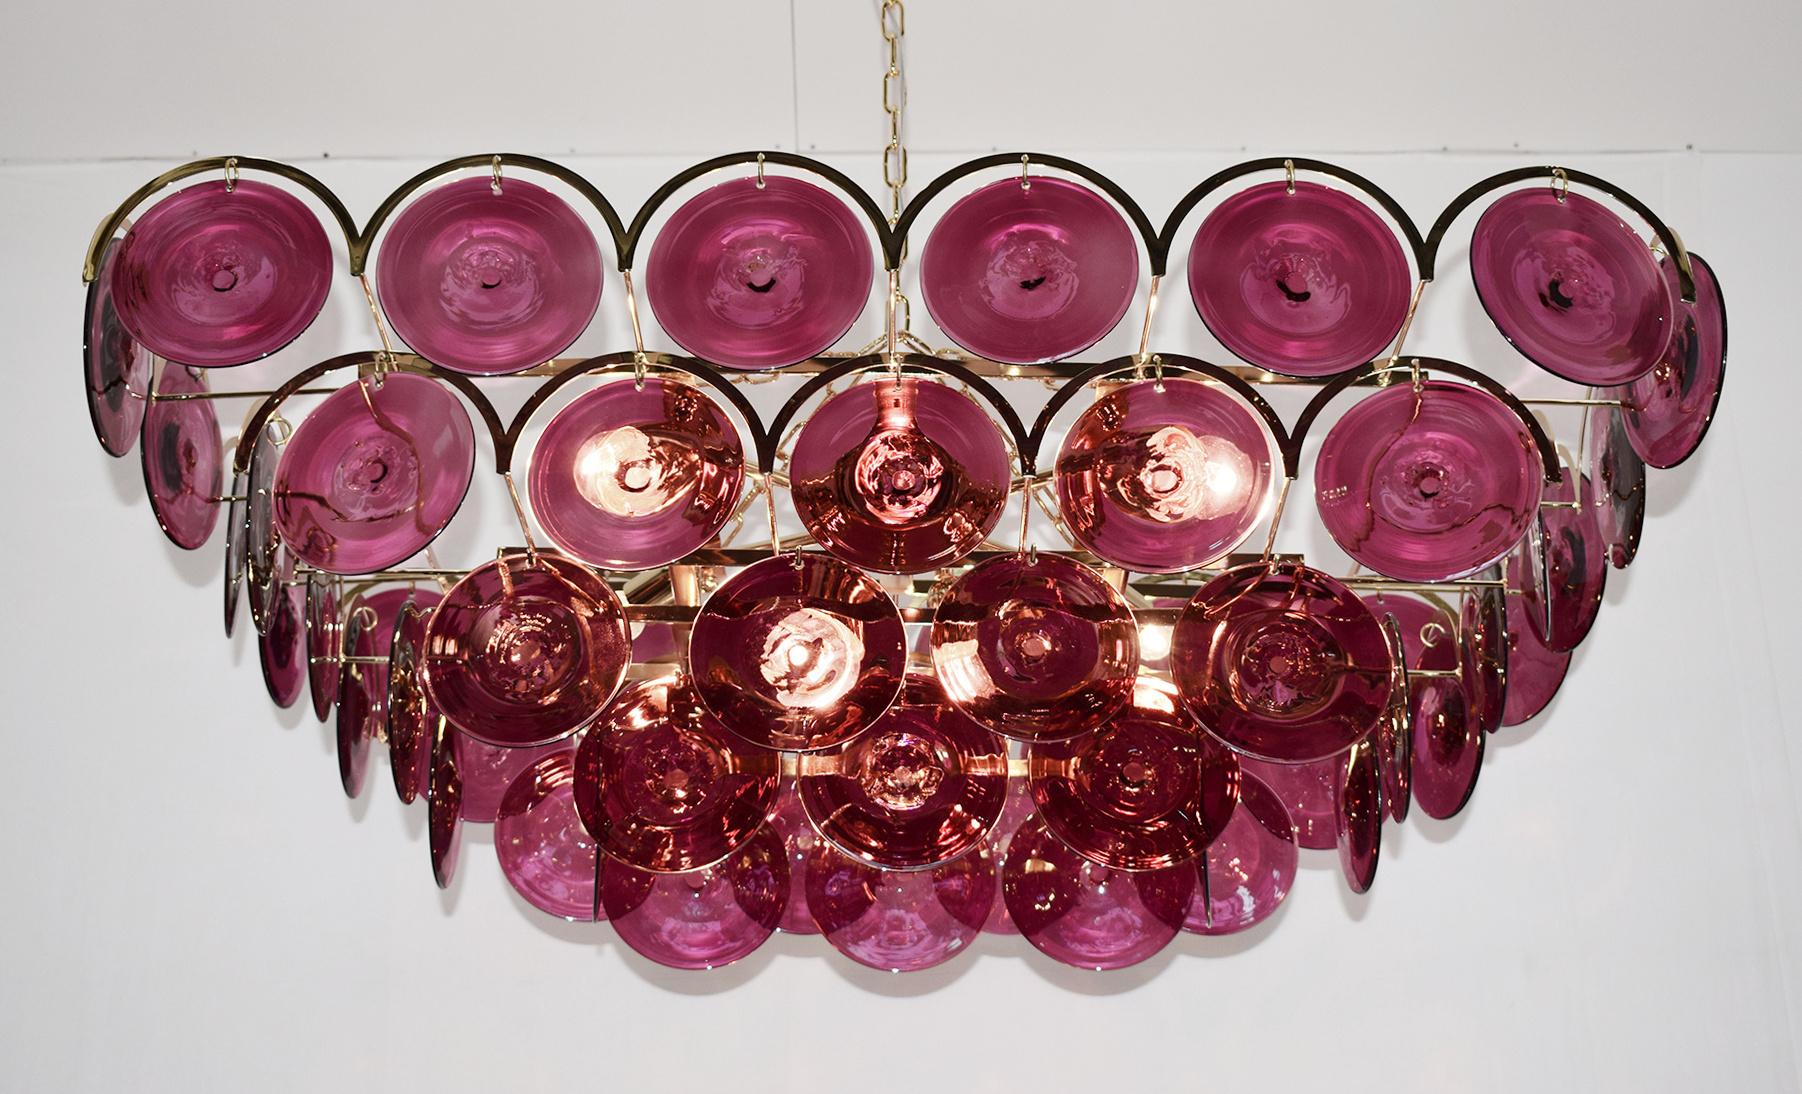 Italian chandelier with burgundy colored hand blown Murano glass discs mounted on 24 karat gold plated metal frame with decorative arch details, by Fabio Ltd / Made in Italy
6 lights / E26 or E27 type / max 60W each
Measures: Length 37.5 inches,